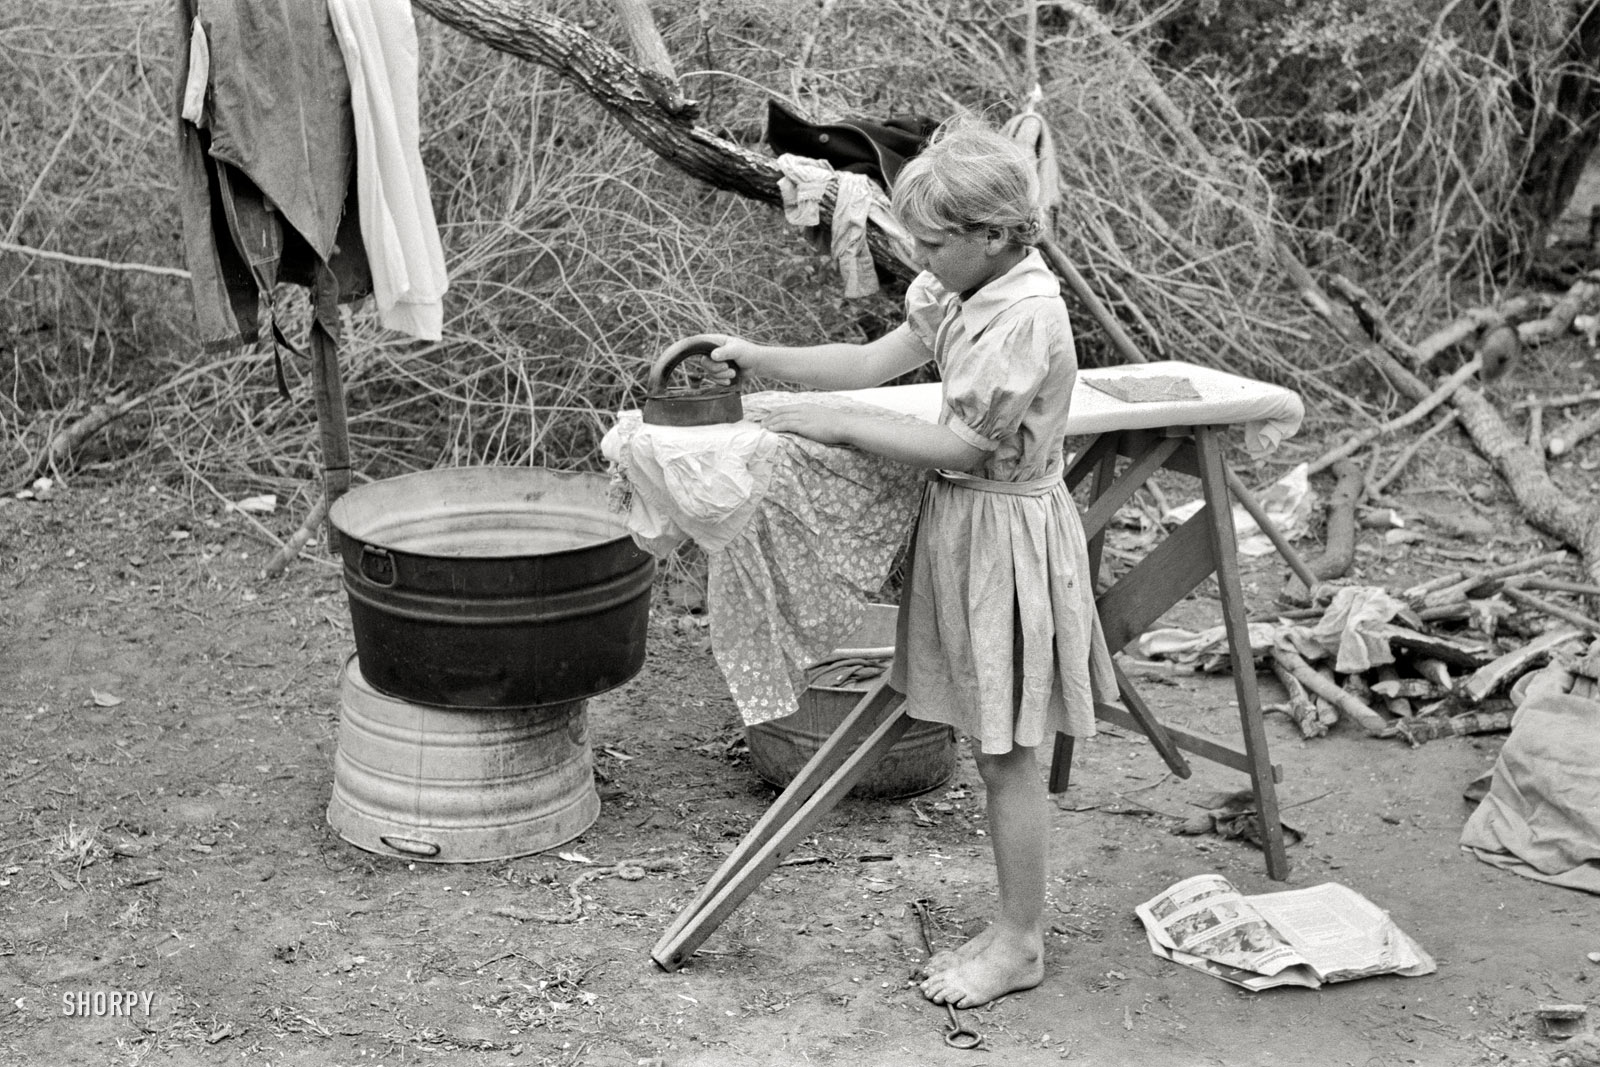 February 1939. "Child of white migrant worker ironing in tent camp near Harlingen, Texas." 35mm negative by Russell Lee for the FSA. View full size.